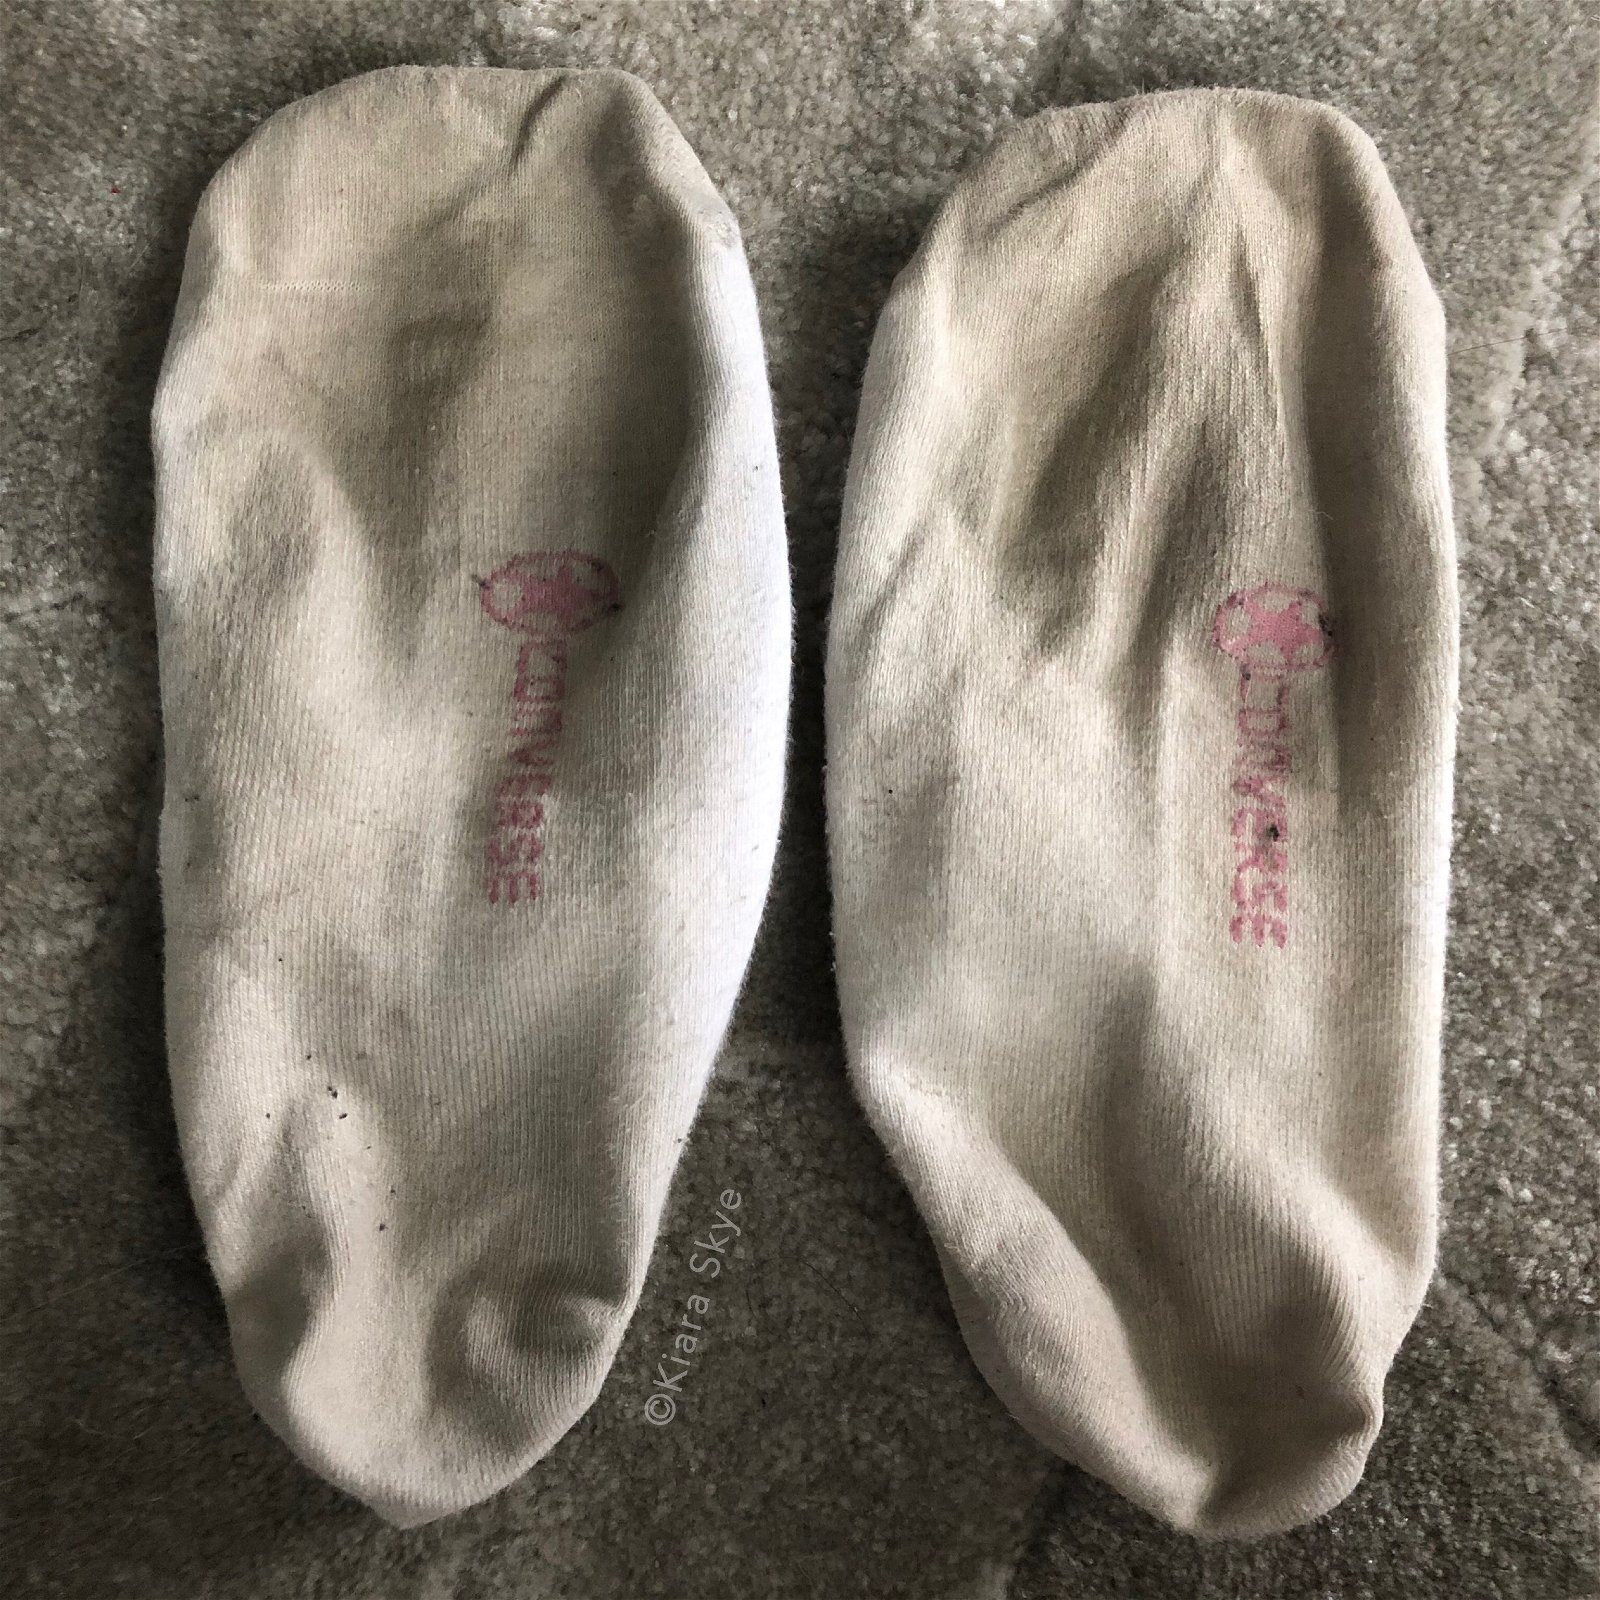 Photo by Kiara Skye with the username @KiaraSkye, who is a star user,  April 20, 2019 at 1:18 AM. The post is about the topic Foot Fetish and the text says '🧦 Worn Socks Auction! 💵

#bid here- 🧦 Worn Socks Auction! 💵

#bid here- http://www.ebanned.net/cgi-bin/auction/auction.cgi?category=wclothing23&item=1556322744

#footfetish #smellyfeet #stinkyfeet #wornsocks #whitesocka #dirtysocks #feet #smallfeet'